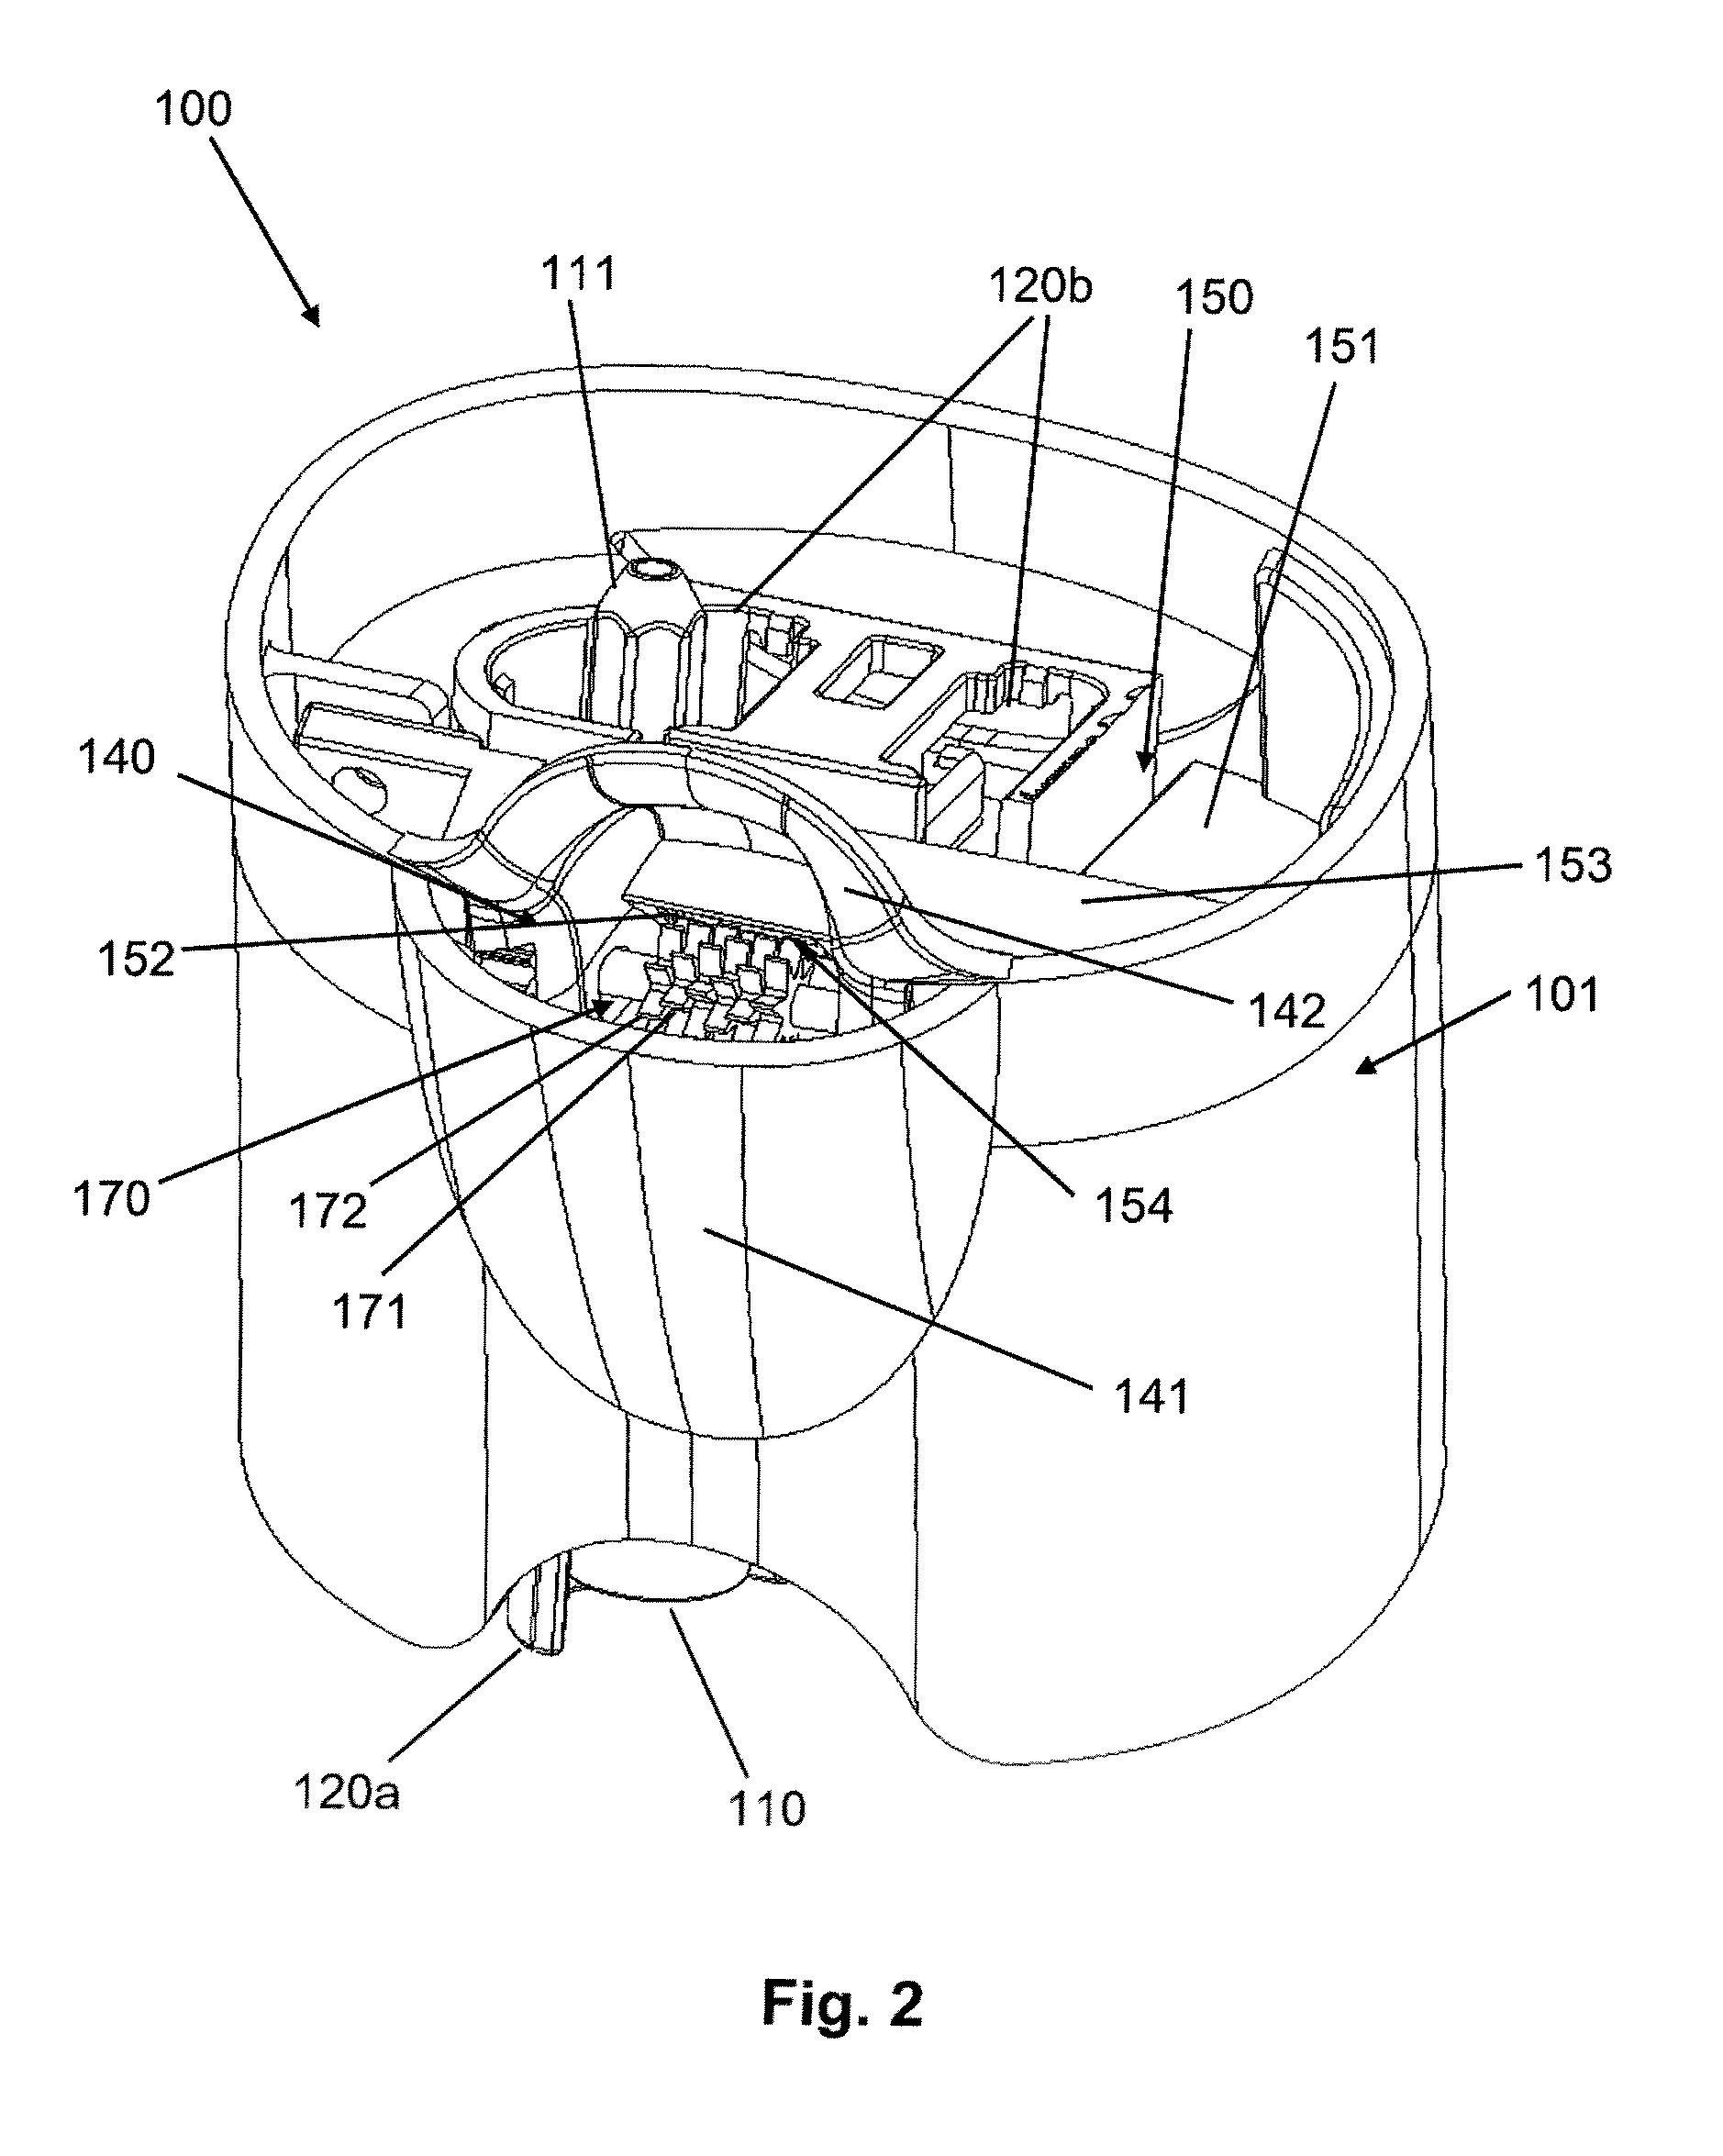 Body grooming device comprising an atomizer unit